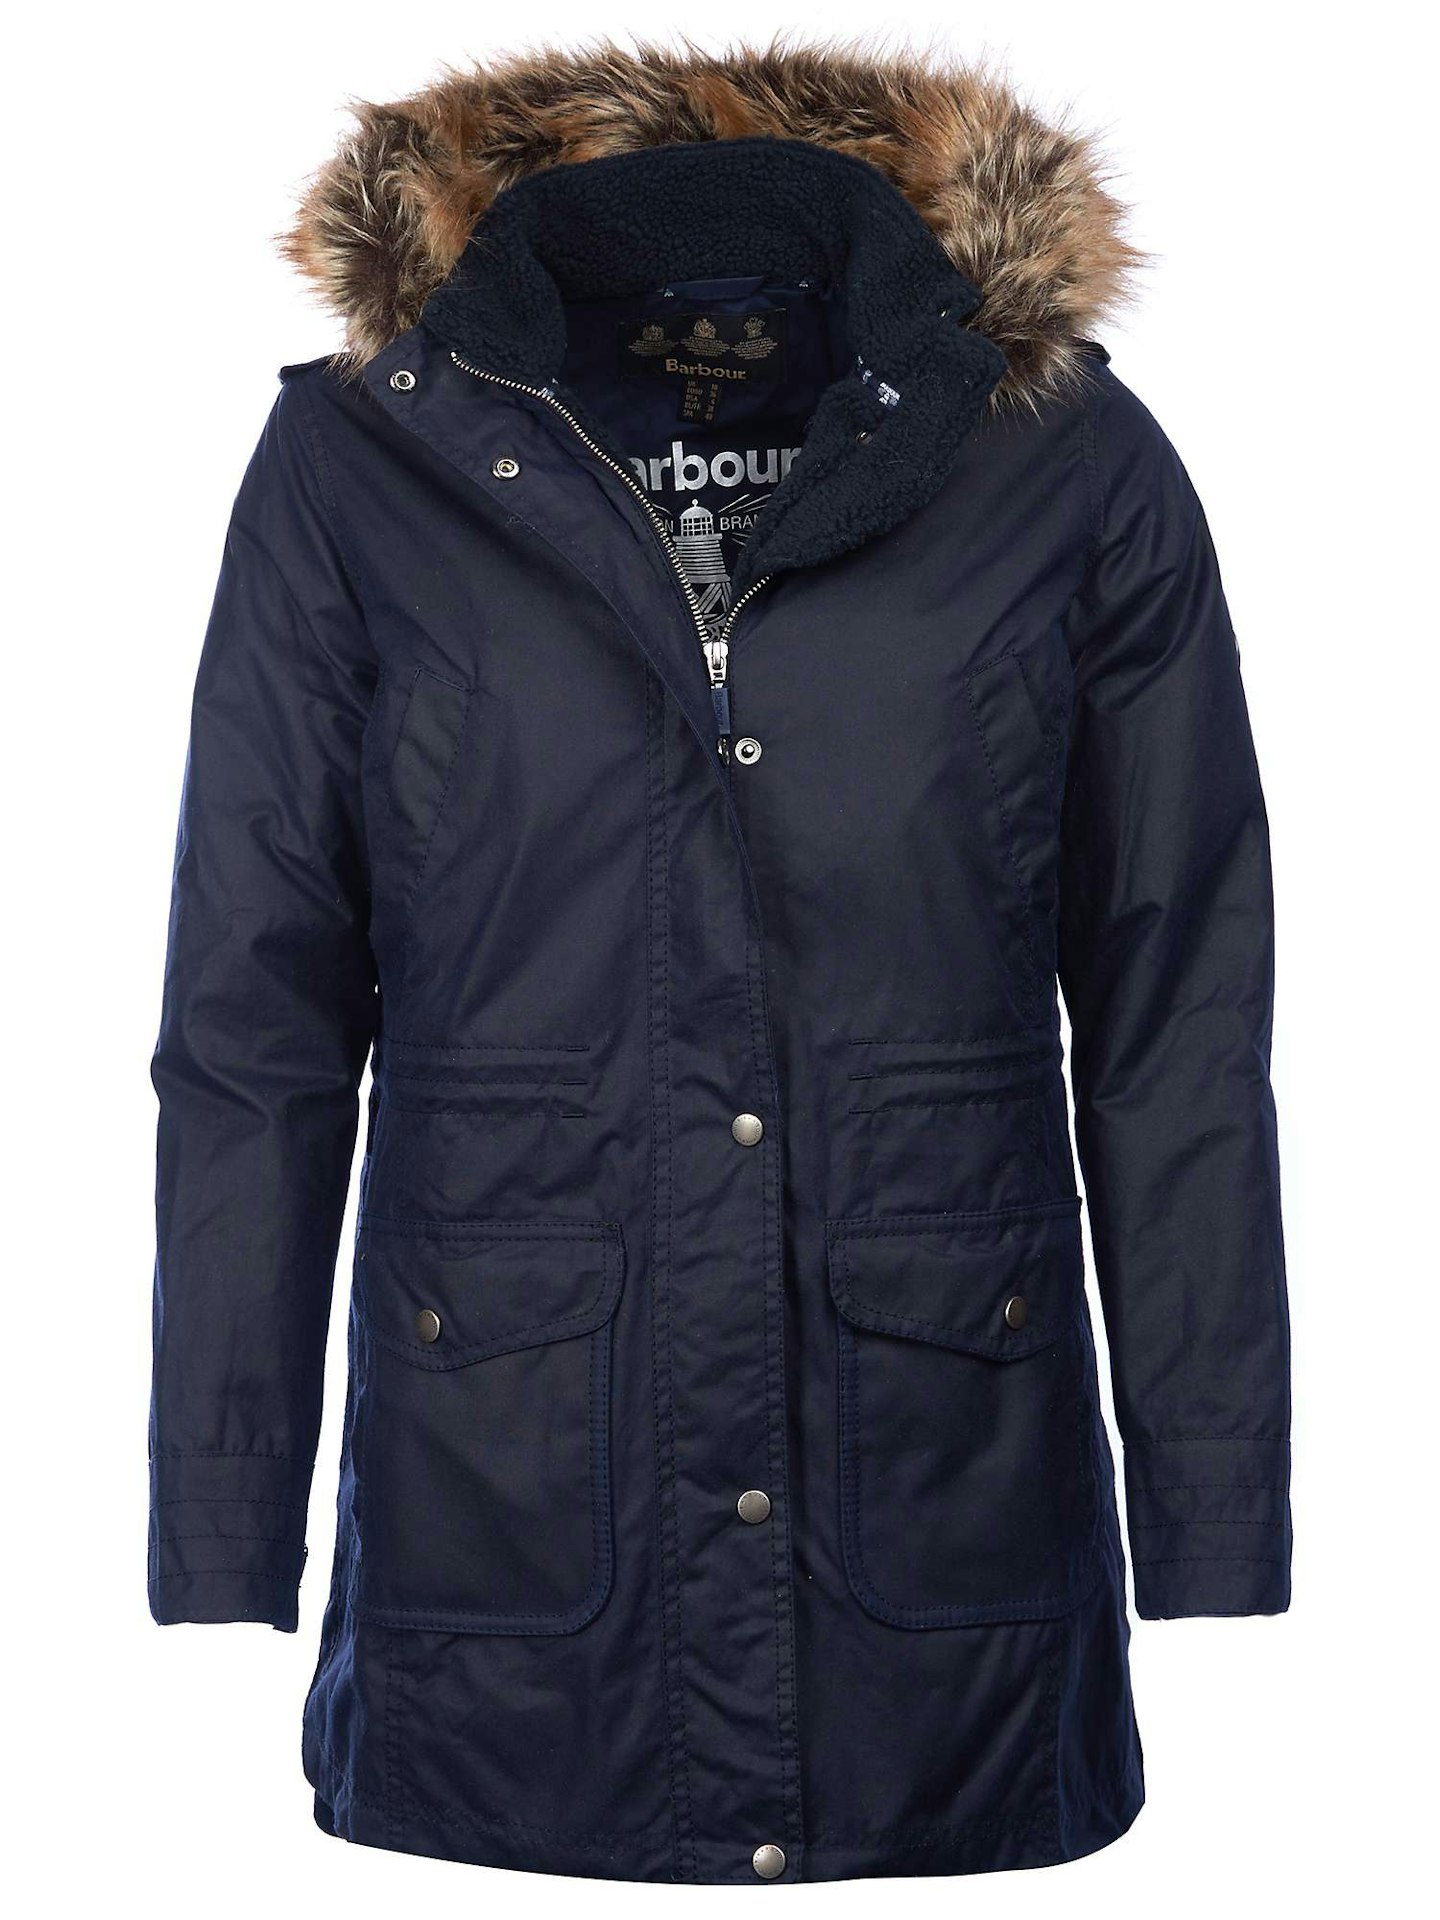 Barbour, Waxed Hooded Jacket, £279